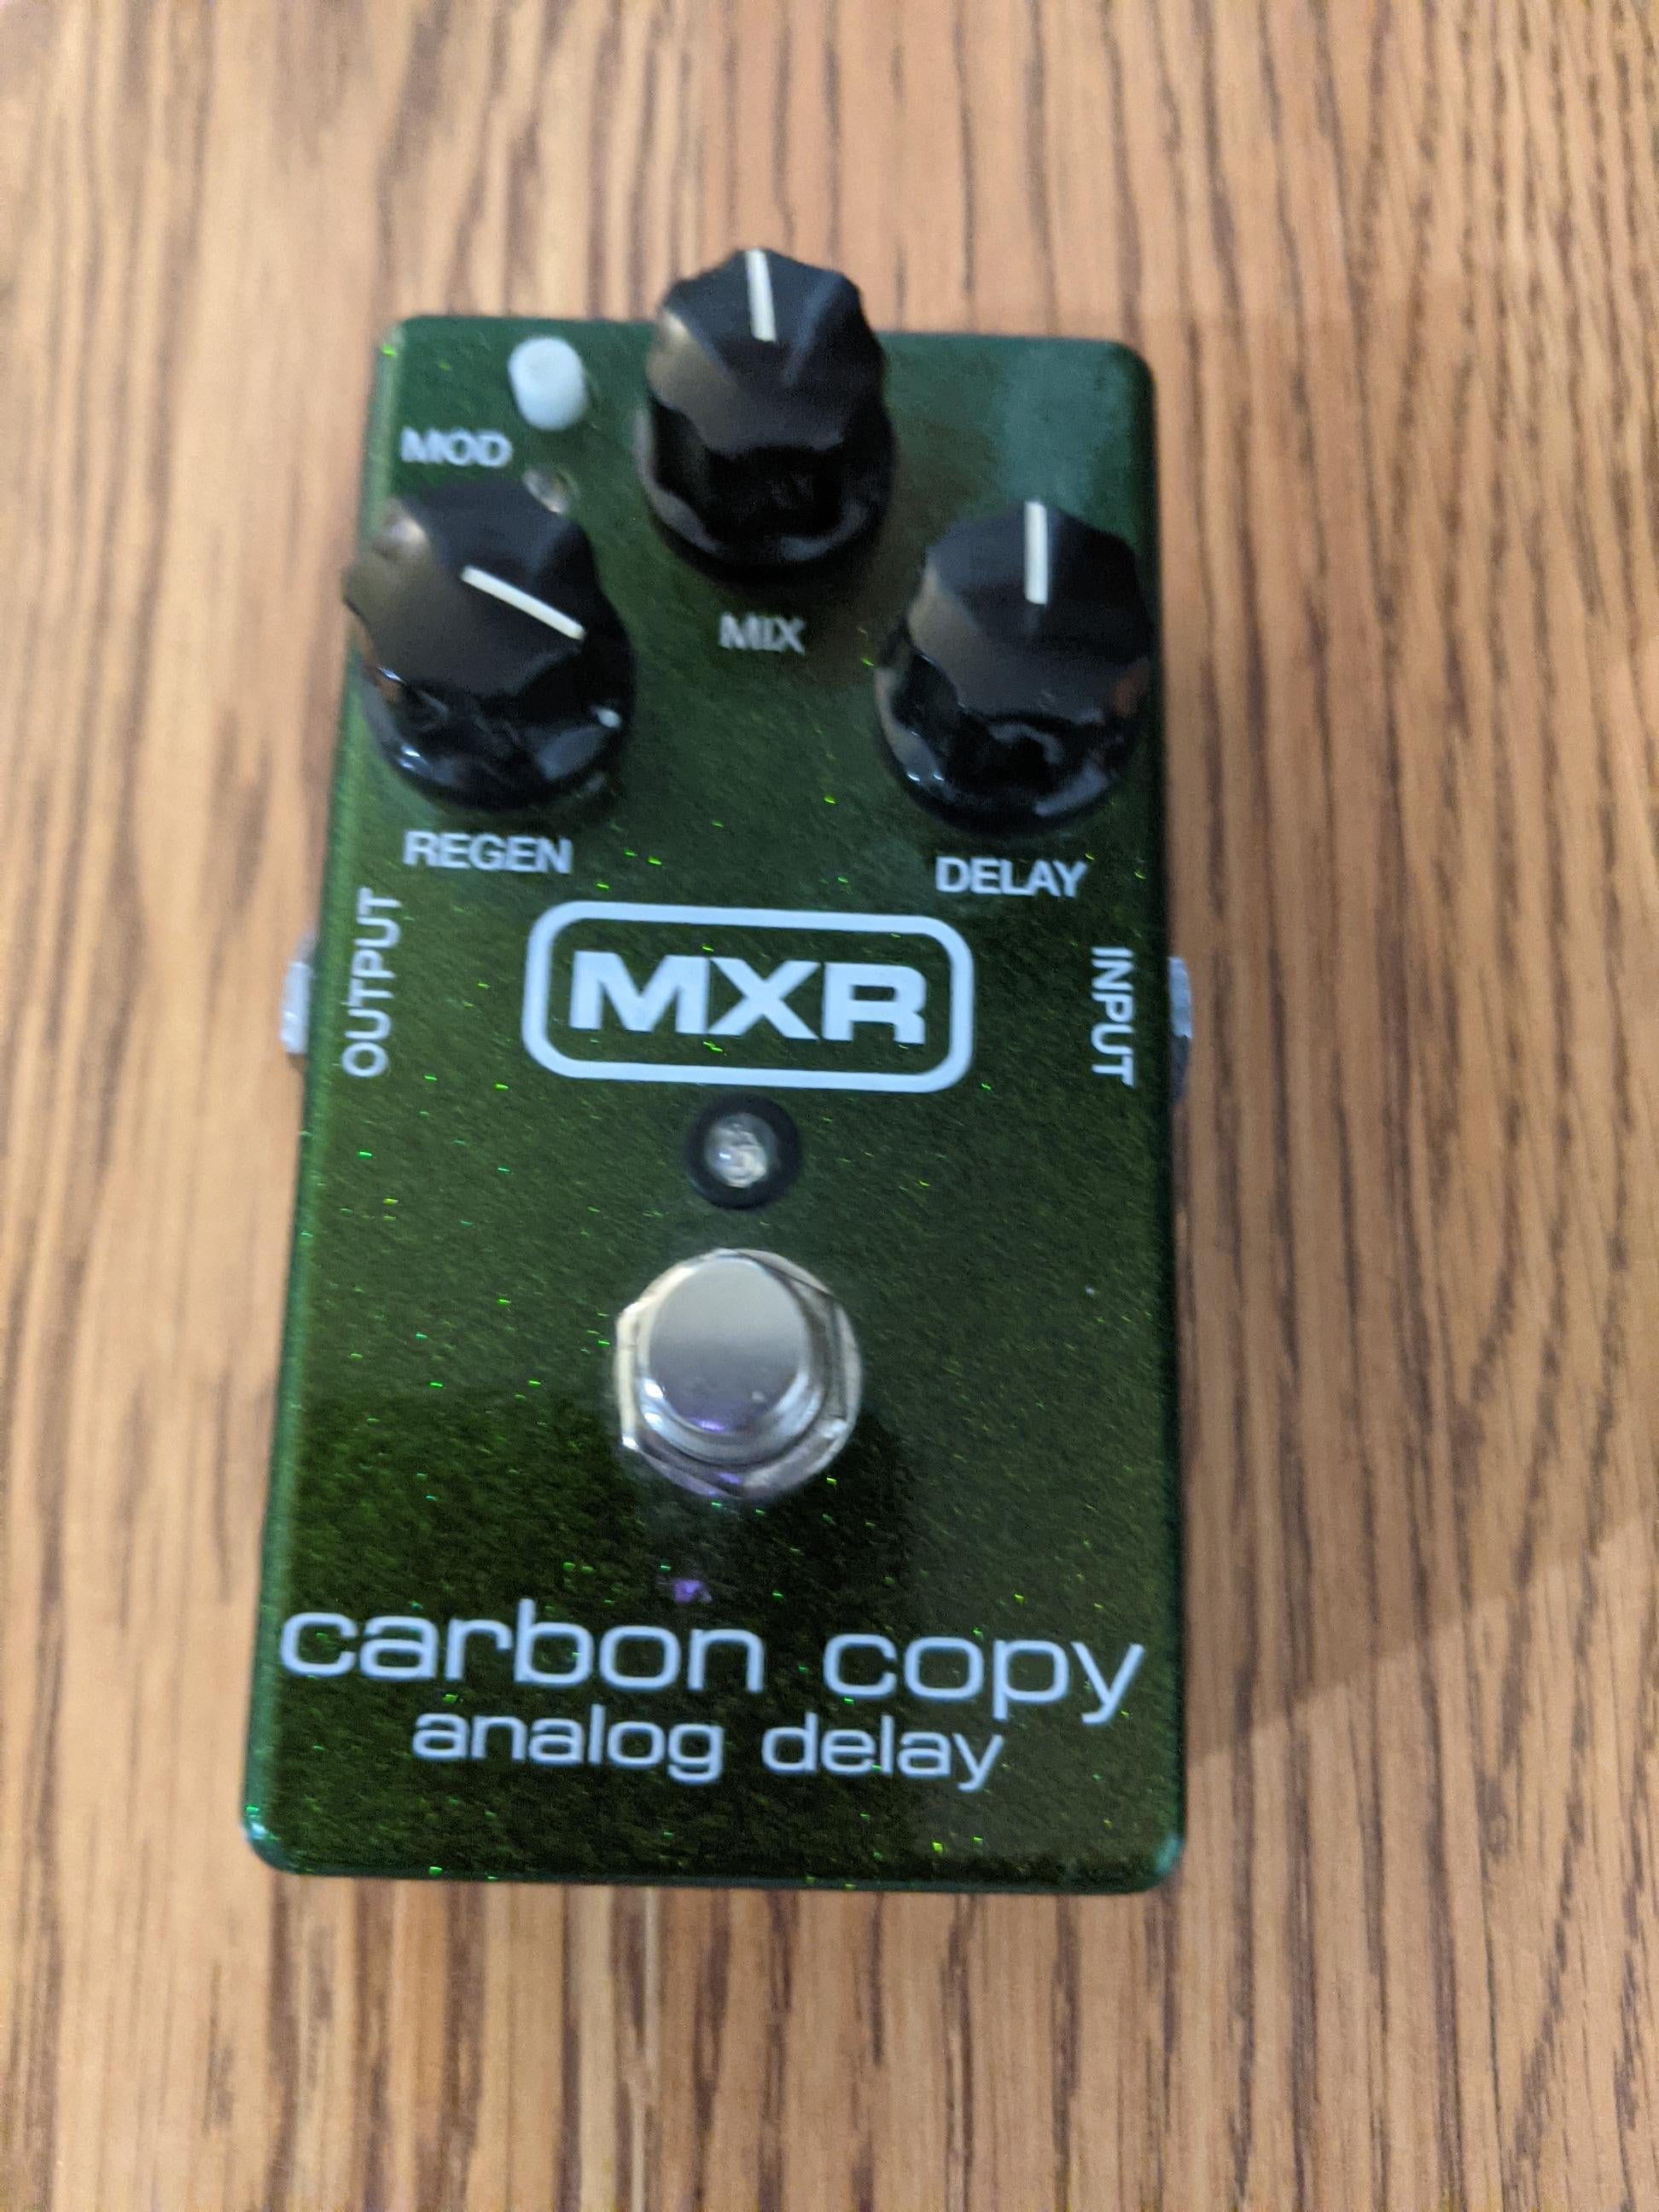 Used MXR M169 Carbon Copy Analog Delay Pedal - Sweetwater's Gear